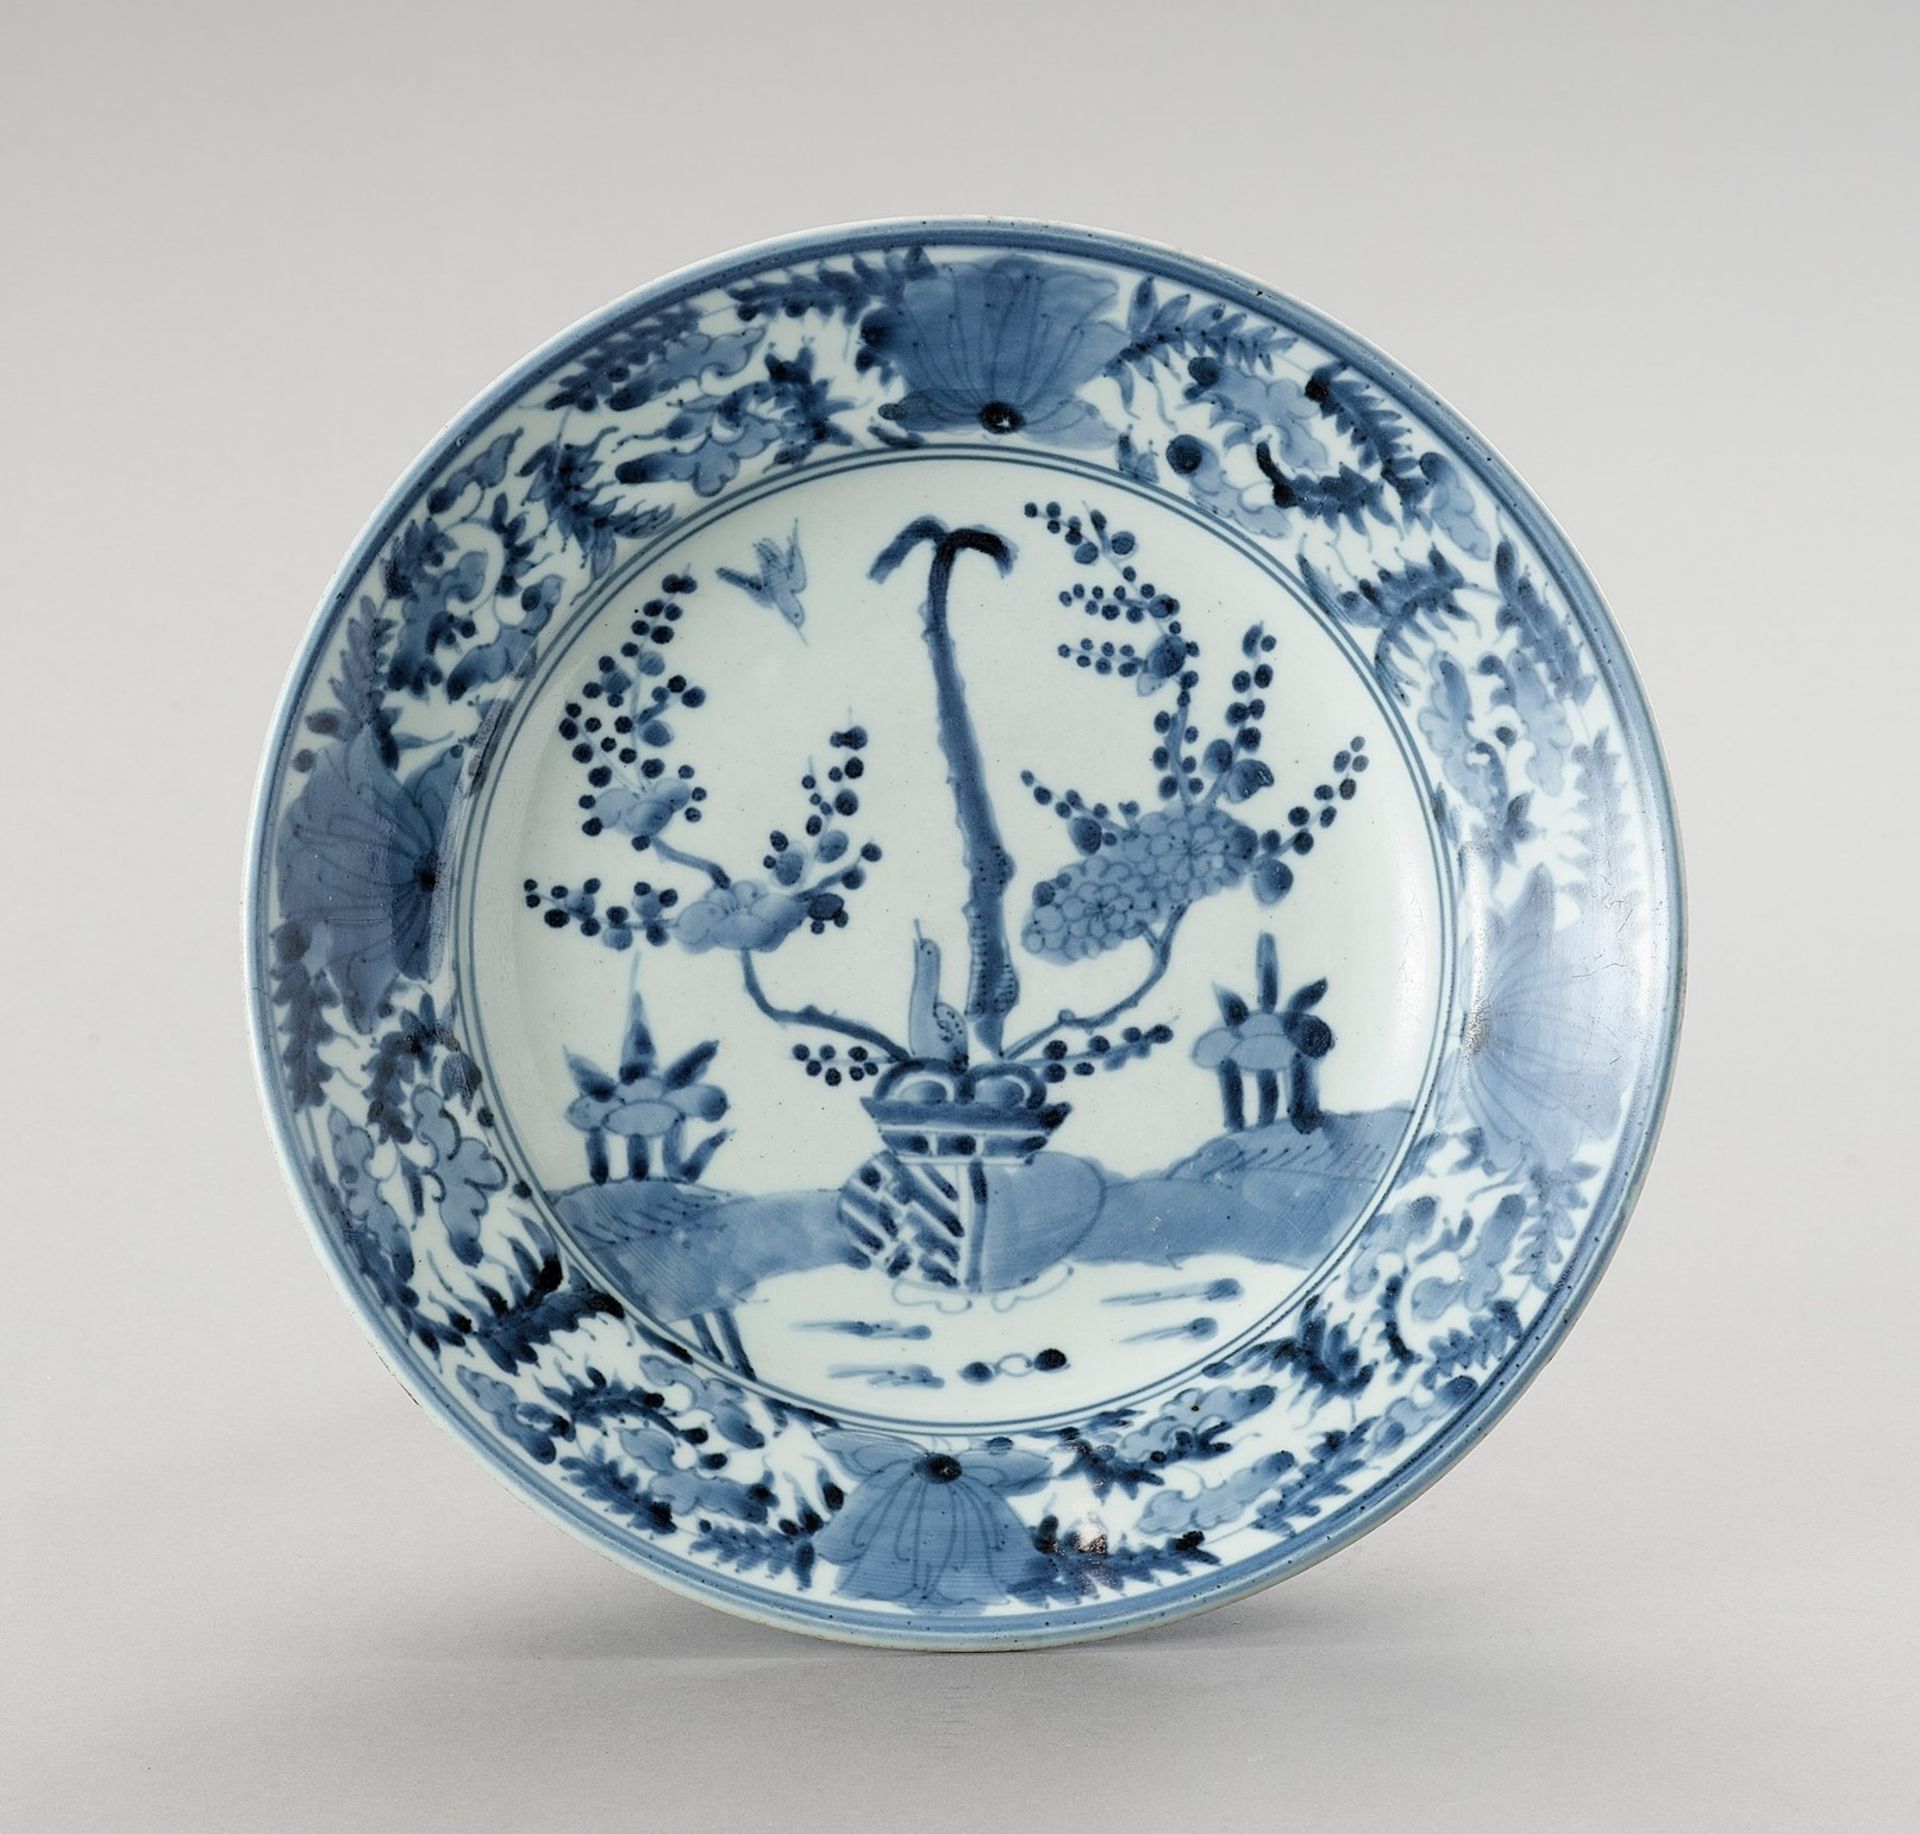 A 'KRAAK' STYLE BLUE AND WHITE PORCELAIN DISH